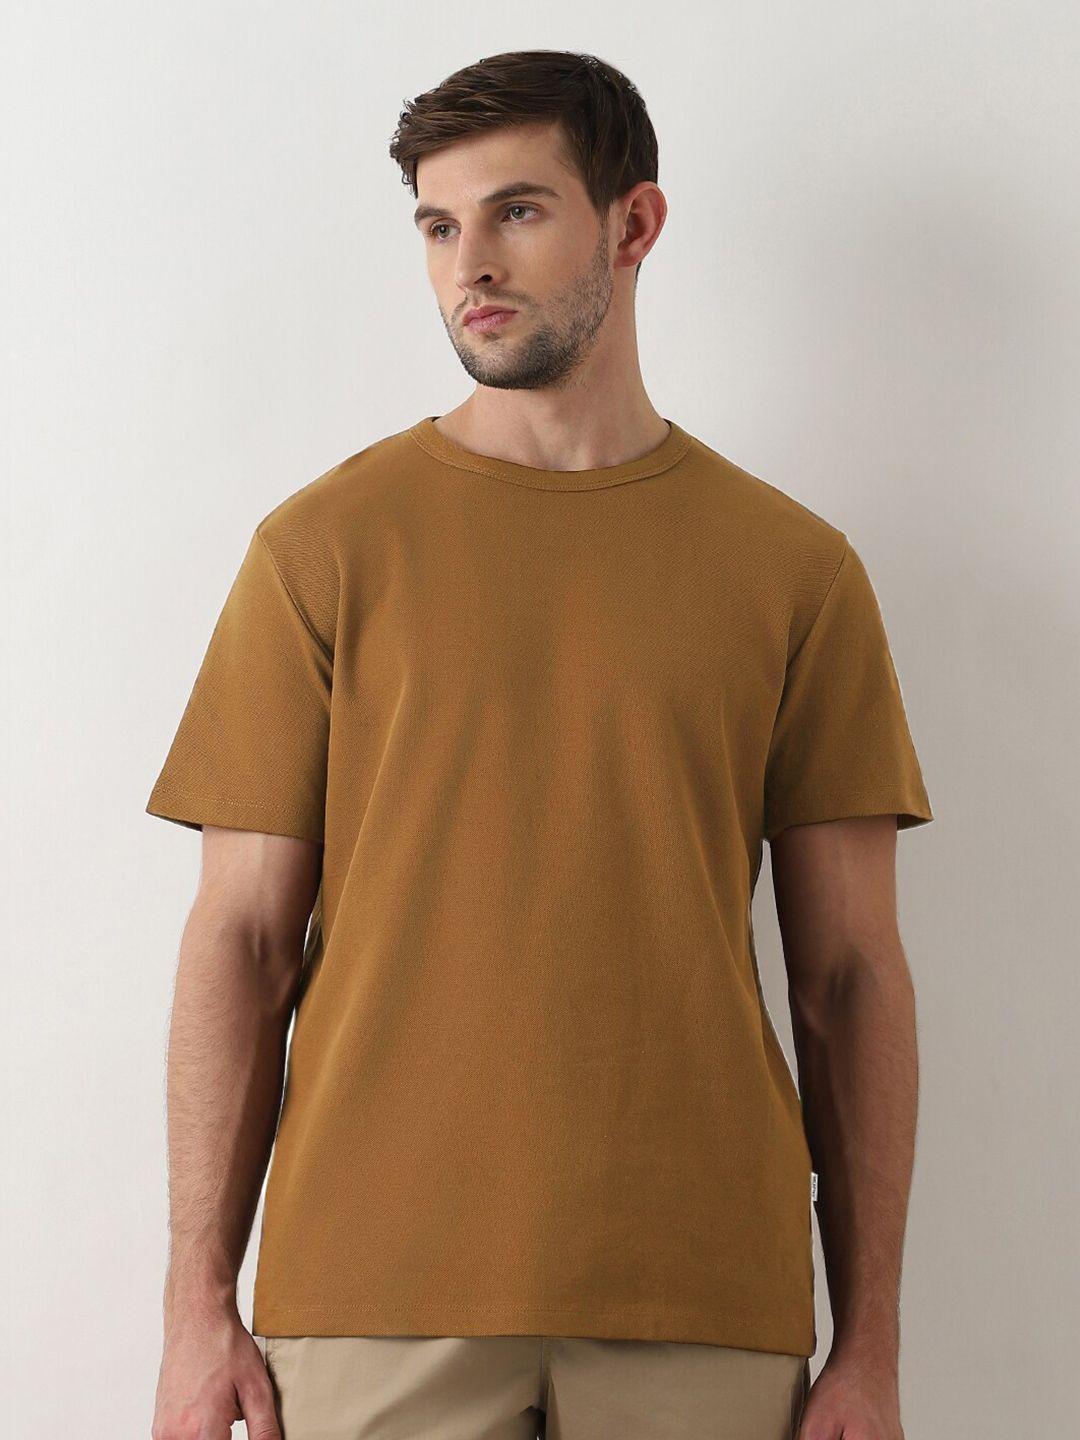 selected short sleeves round neck organic cotton t-shirt